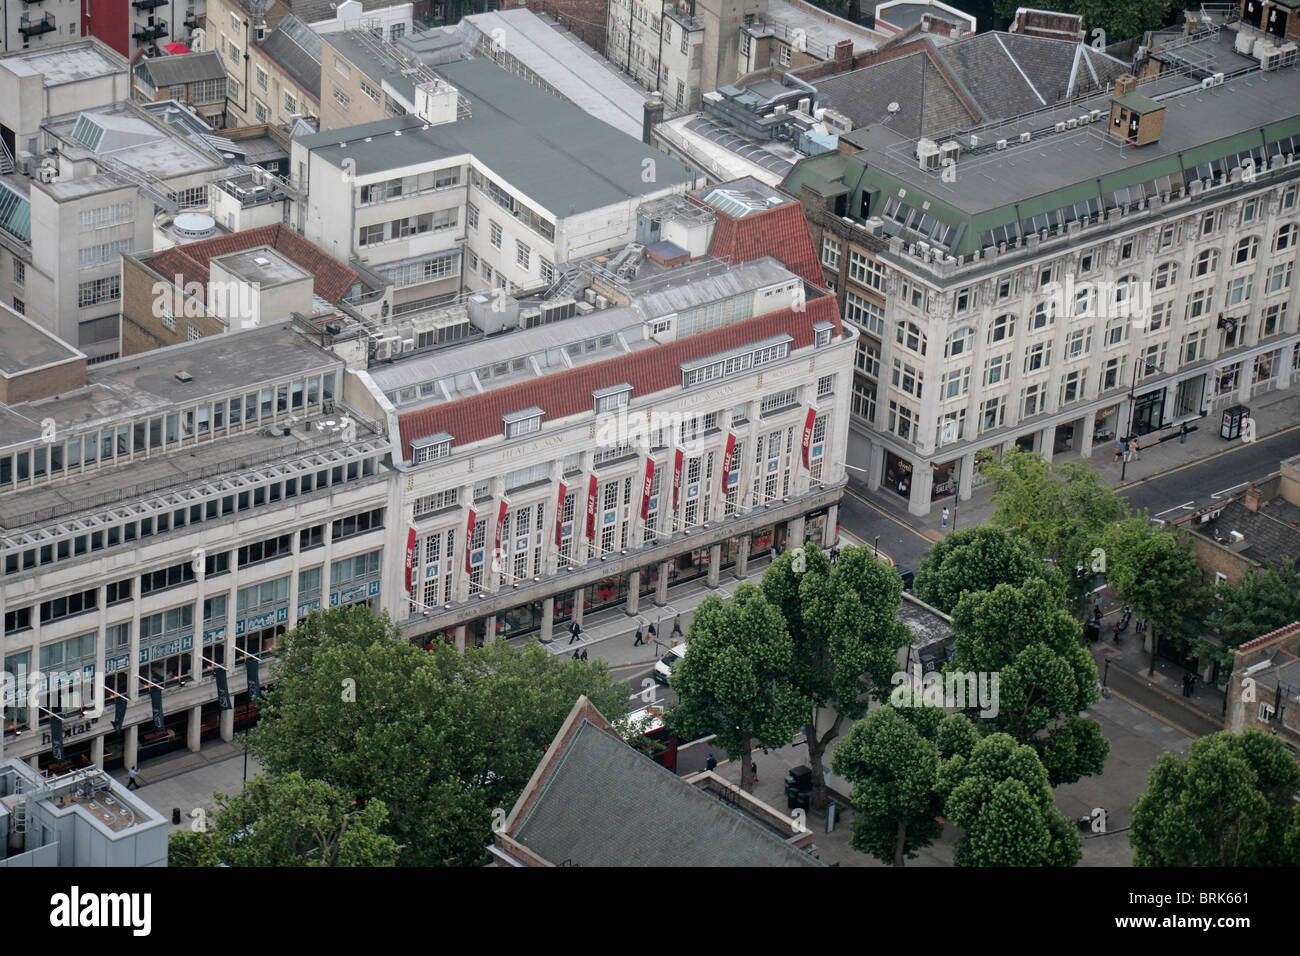 Aerial view of the Habitat , Heal & Sons (Heals) & Pier stores on Tottenham Court Road, in central London, UK. Stock Photo